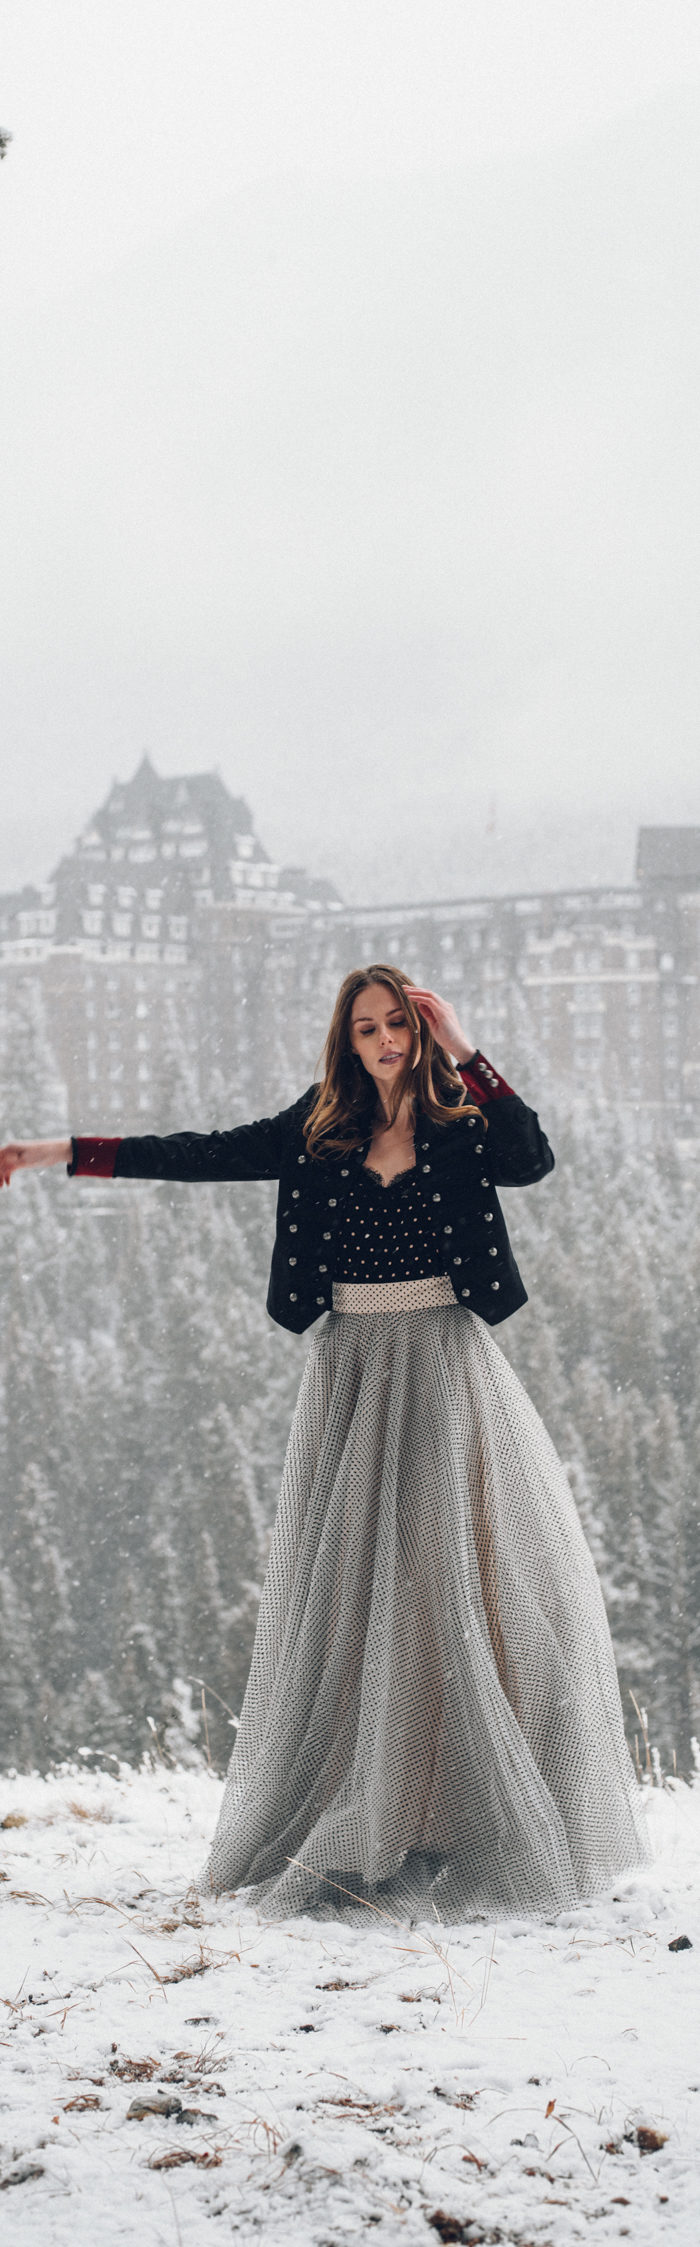 Alyssa Campanella of The A List blog experiences romance in the snow with her husband in Banff, Alberta, Canada at the Fairmont Banff Springs wearing Zimmermann Tempest ballet skirt